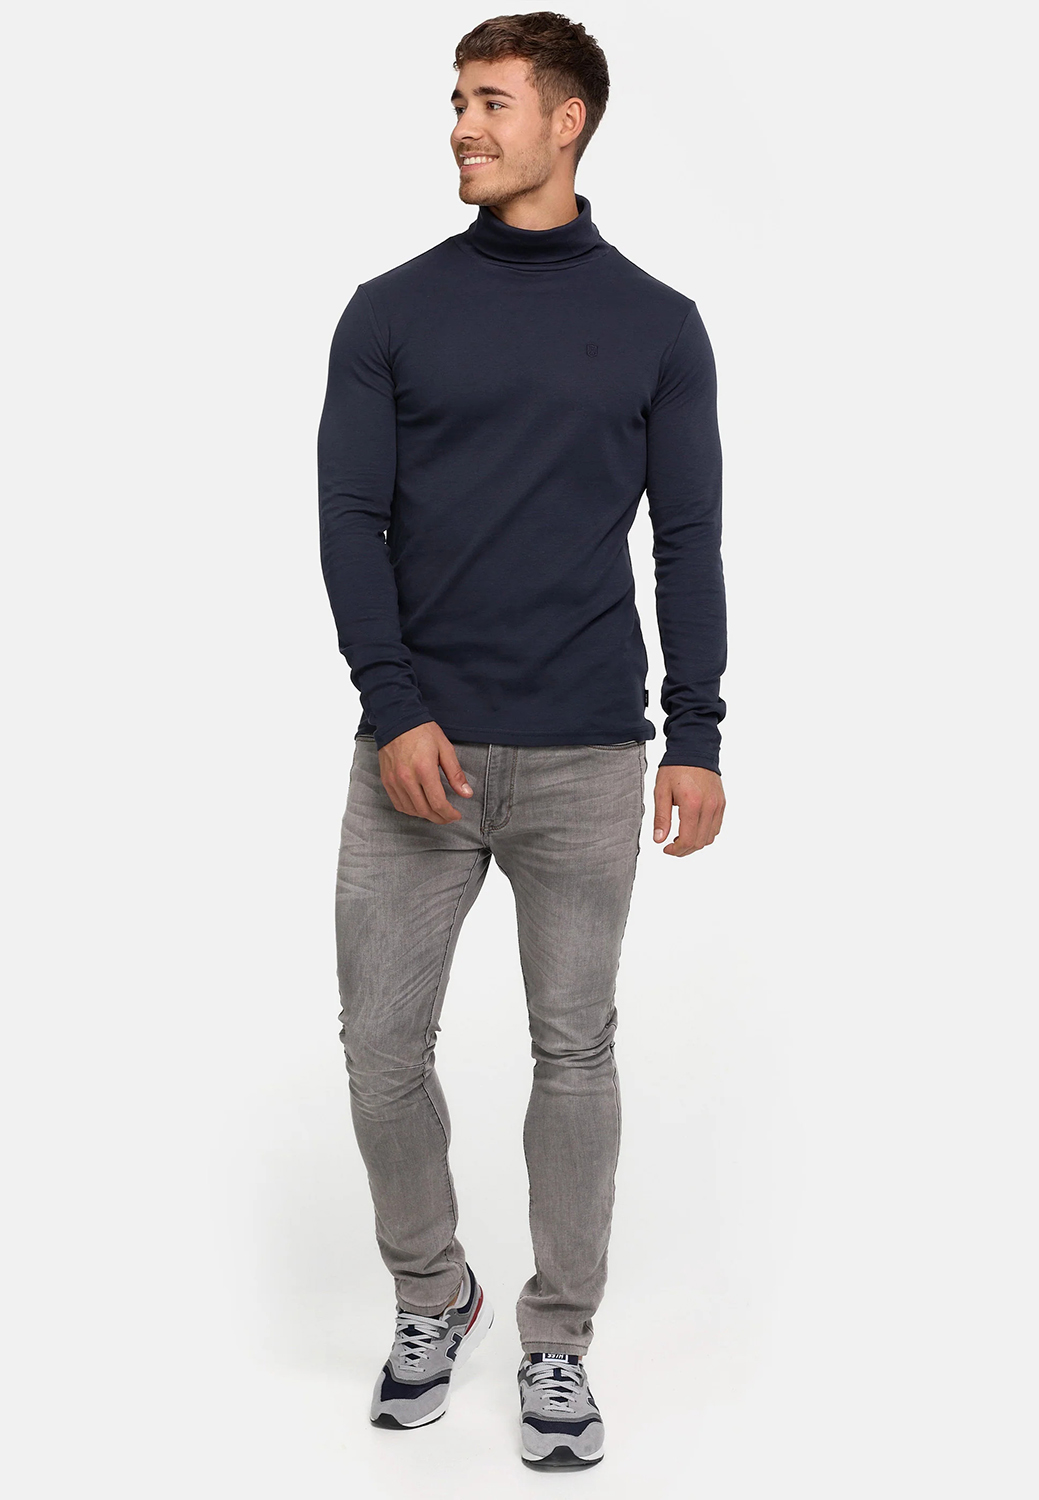 Navy turtleneck, gray jeans, and athletic gray shoes outfit